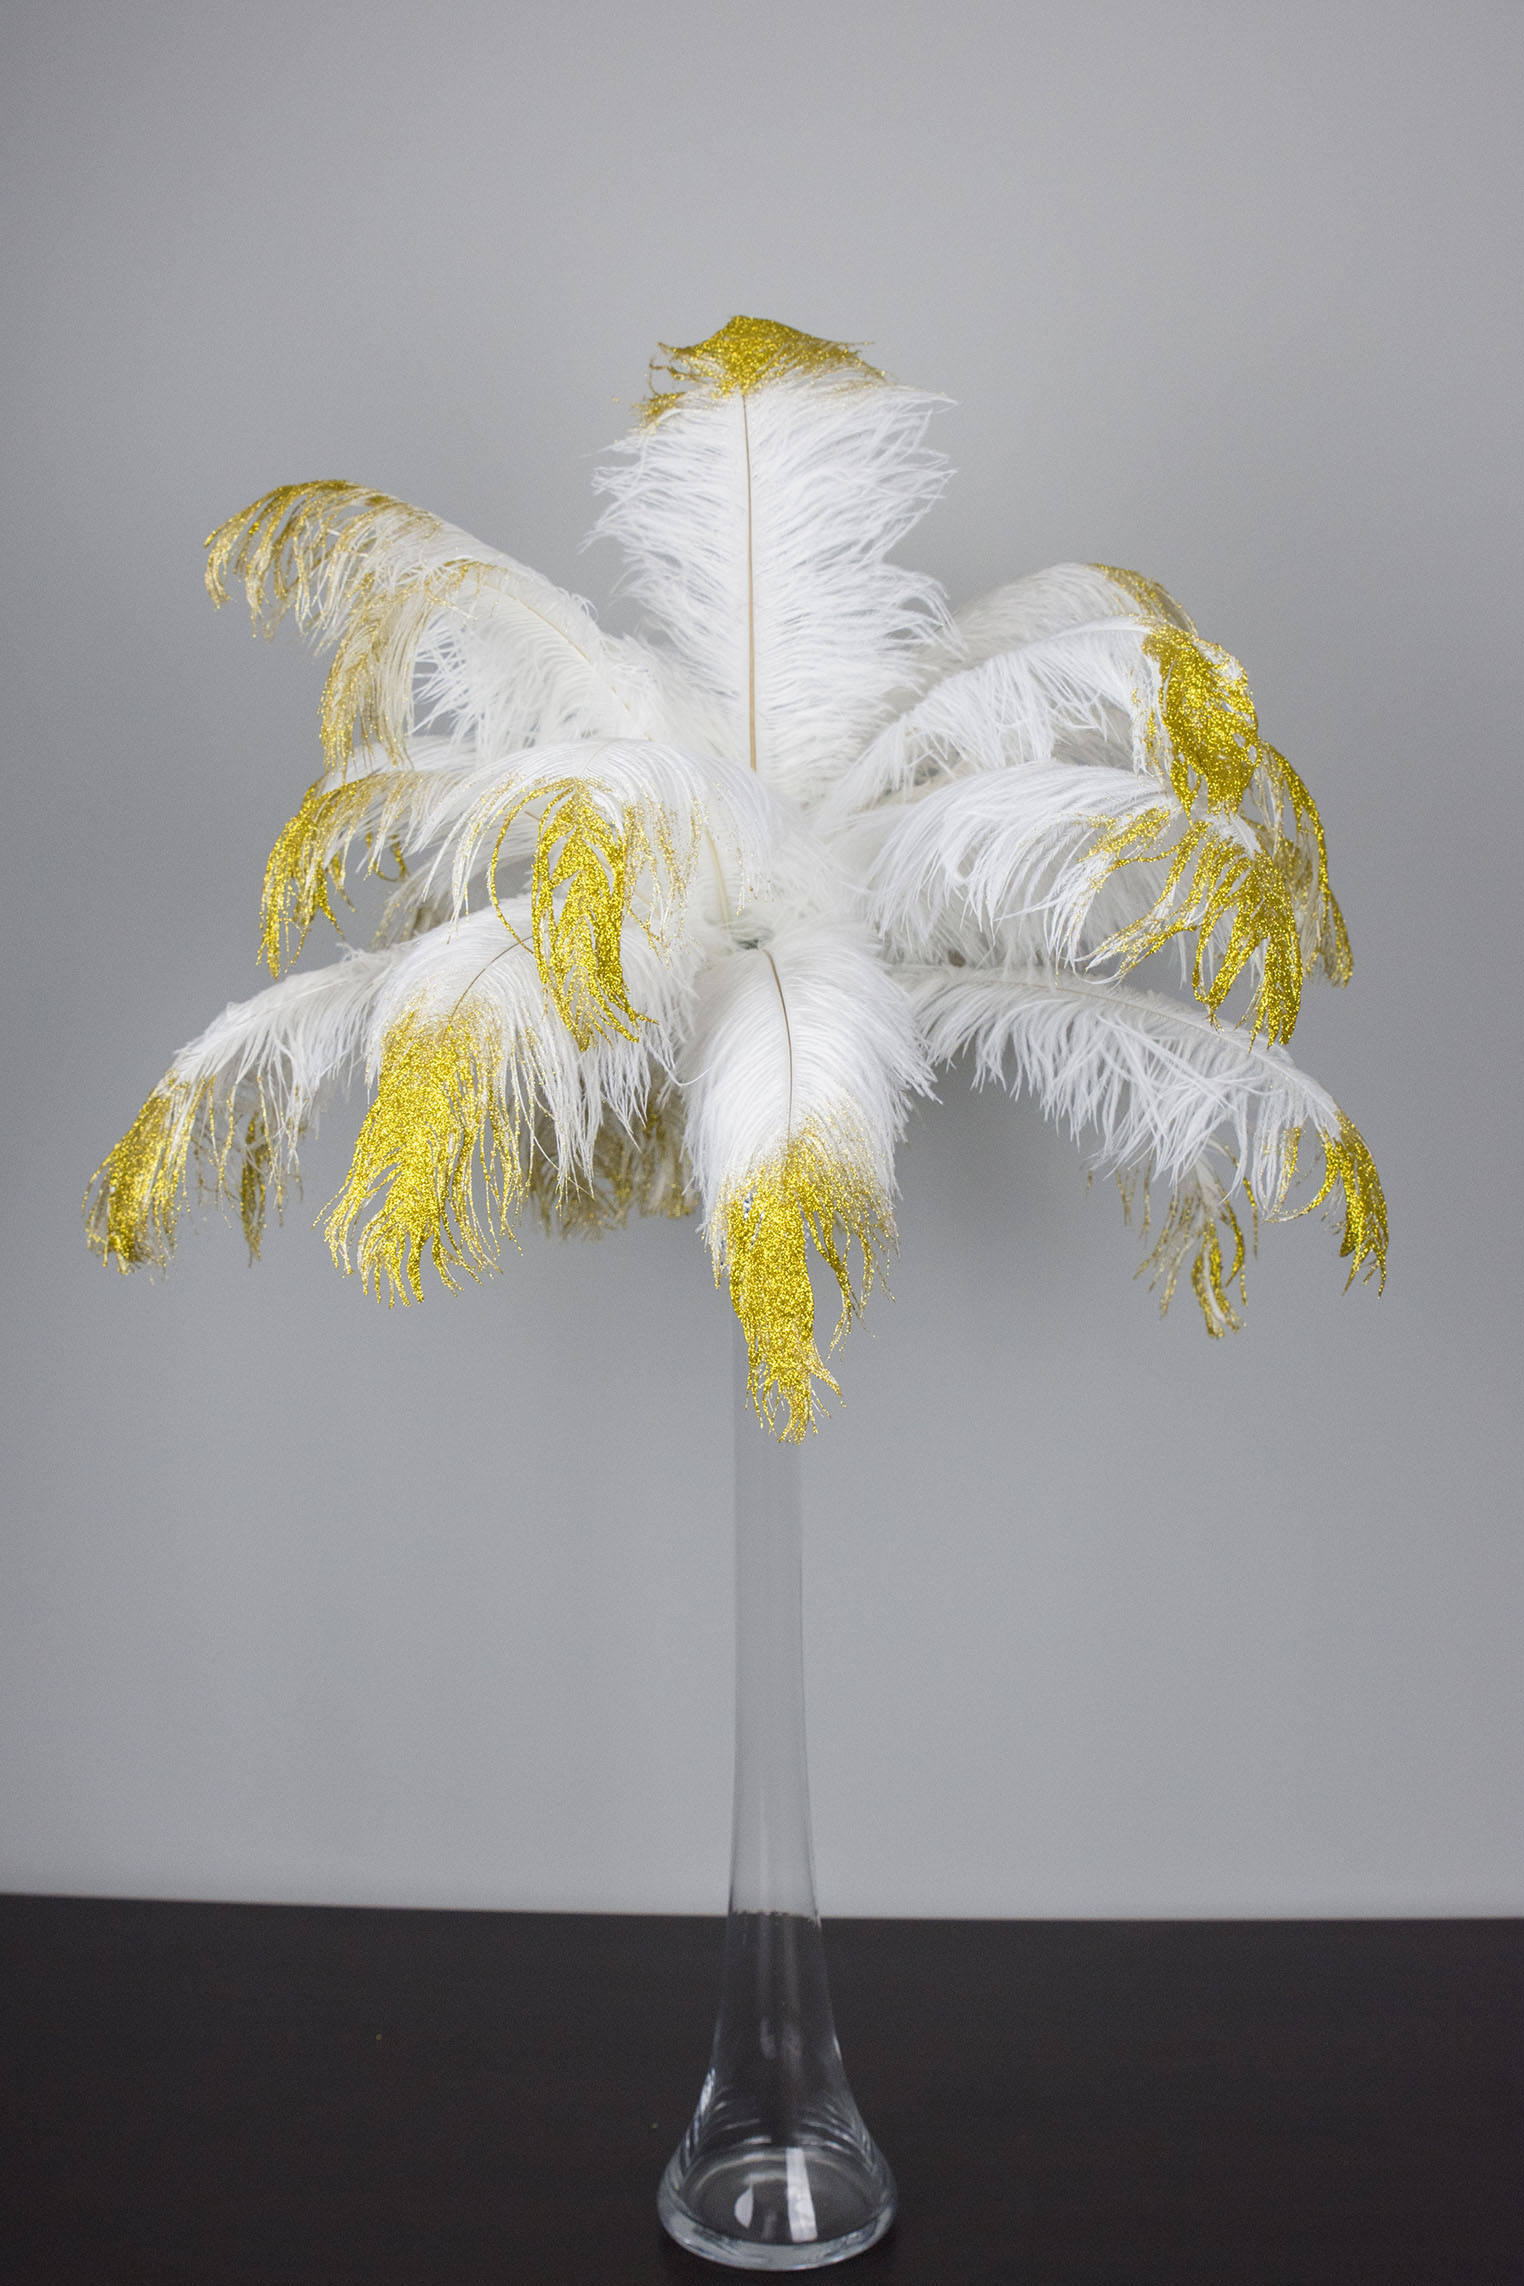 10 Pcs X 8-26 Black Ostrich Feather Plume for Centerpieces and Craft / Old  Hollywood/great Gatsby / Centerpiece Arrangements 